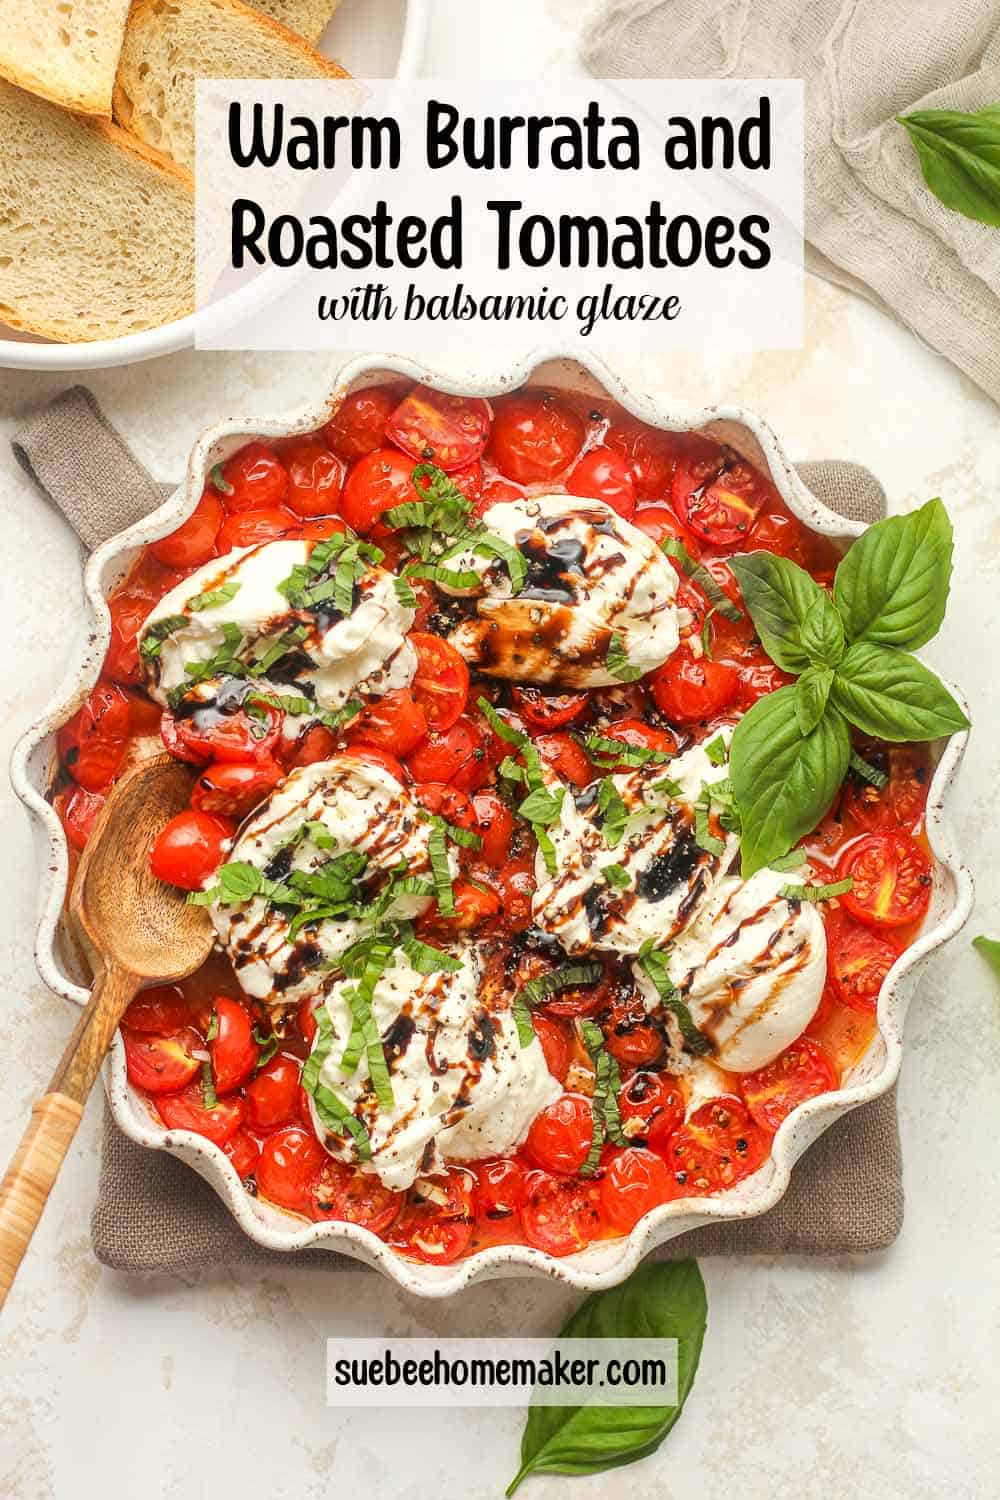 A dish of warm burrata and roasted tomatoes with balsamic glaze.